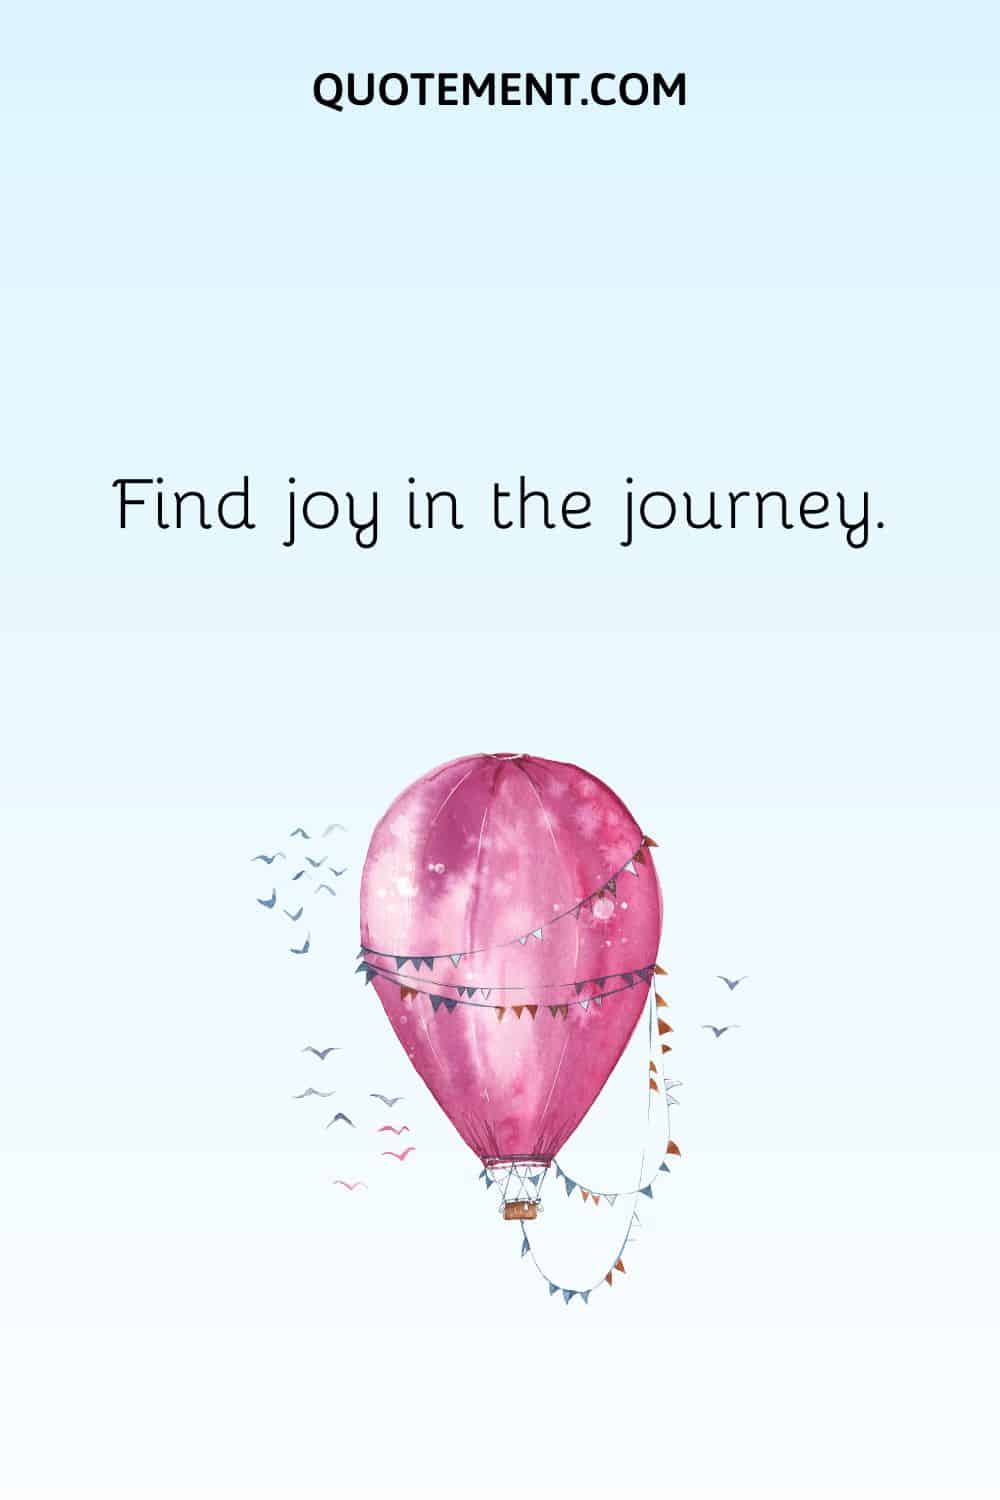  Find joy in the journey